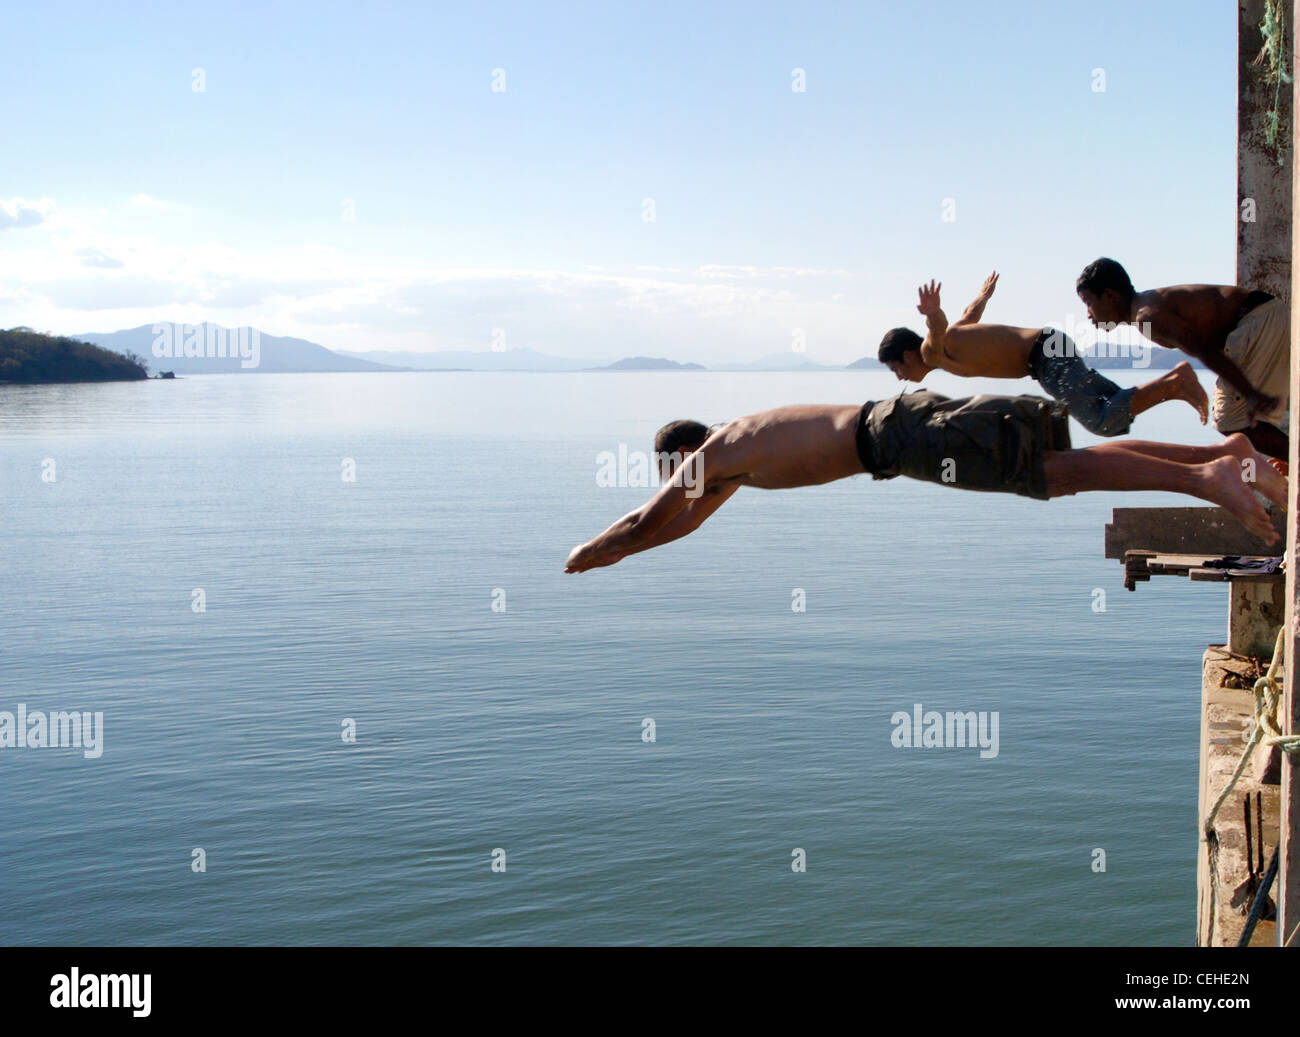 3 men make a coordinated dive with perfect timing into the tranquil waters of San Lucas lake, Costa Rica Stock Photo